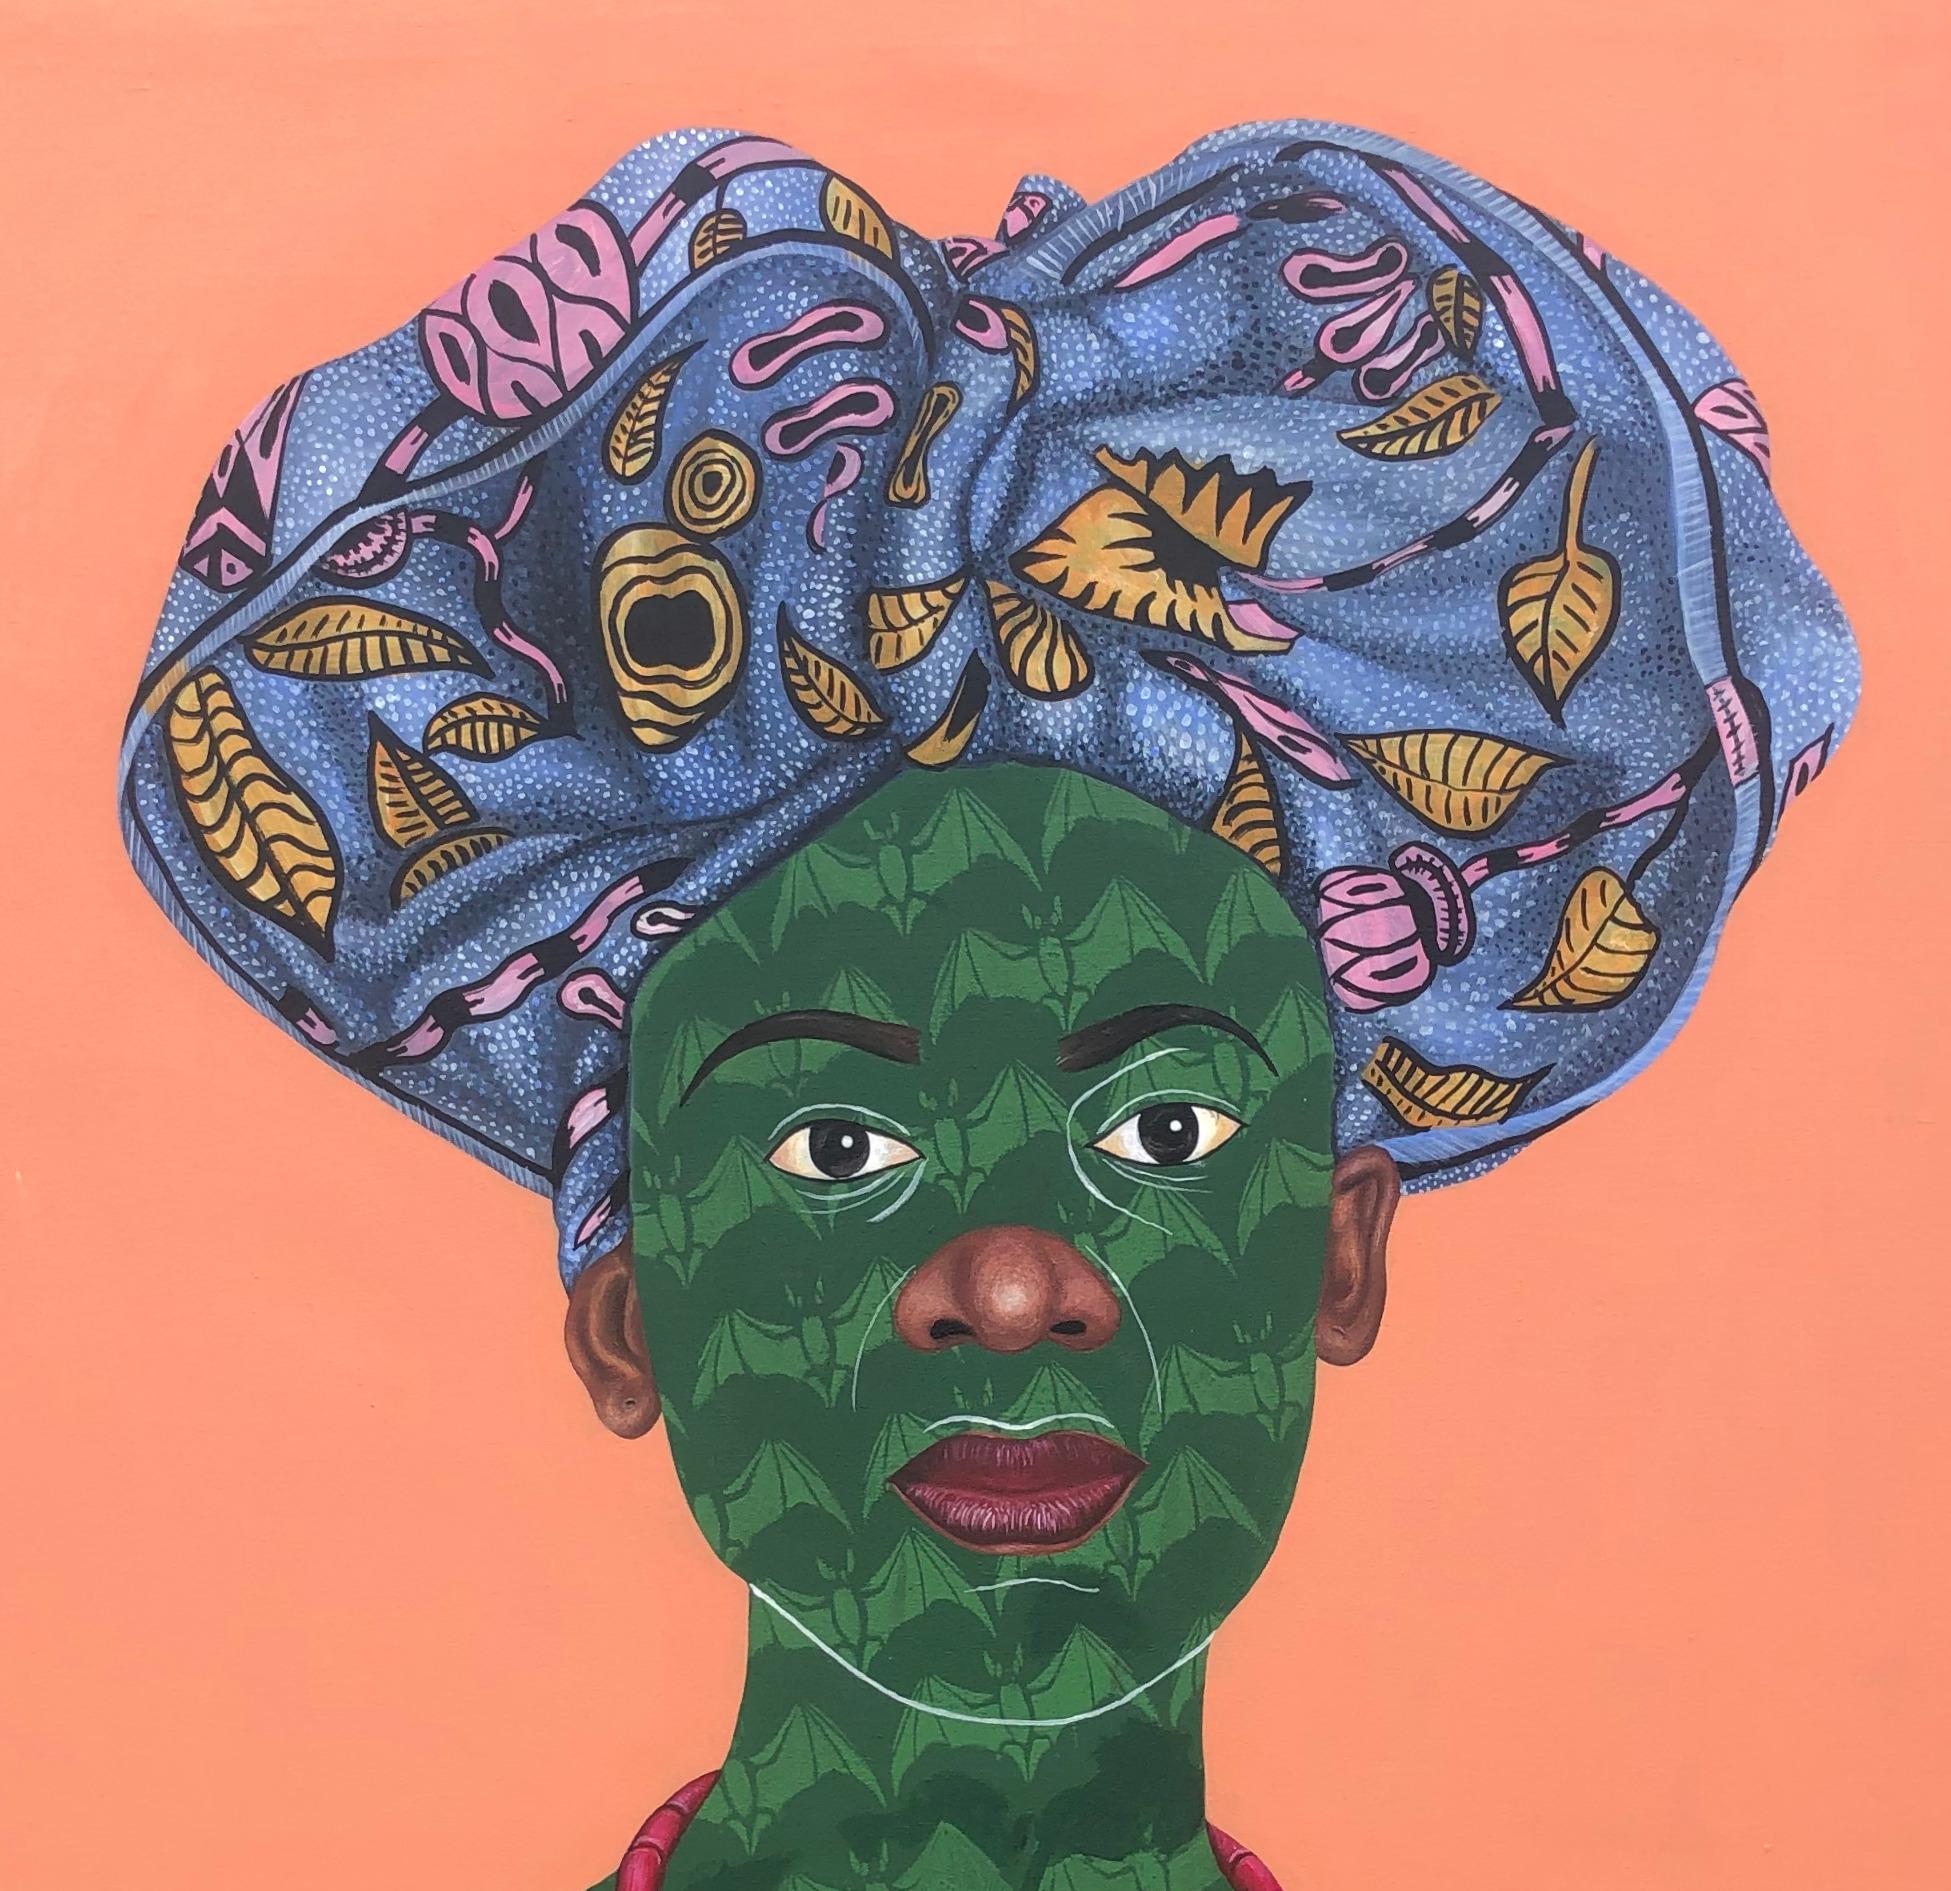 Gele is essentially a type of head tie worn by women in the Western African country of Nigeria. In contrast to the head ties worn in some other African countries, like Ghana, Gele is usually rather large and ornate, and as a result, is associated